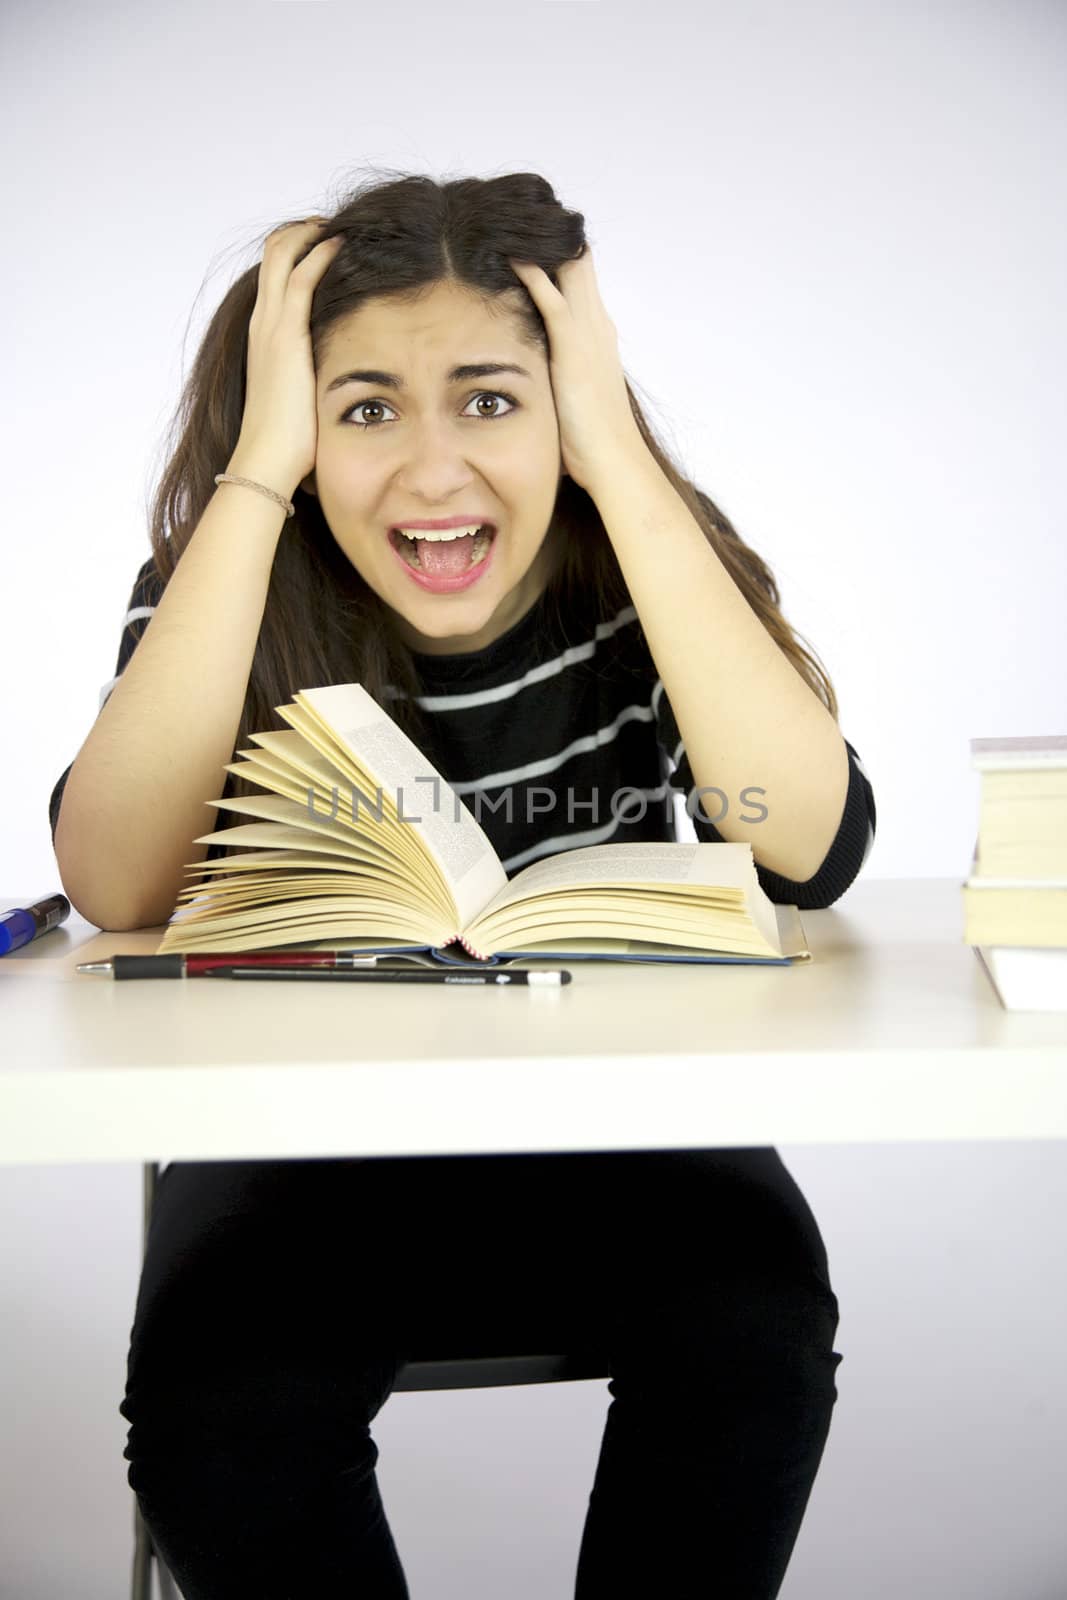 Girl studying book on a desk shouts desperate with hands in her long hair